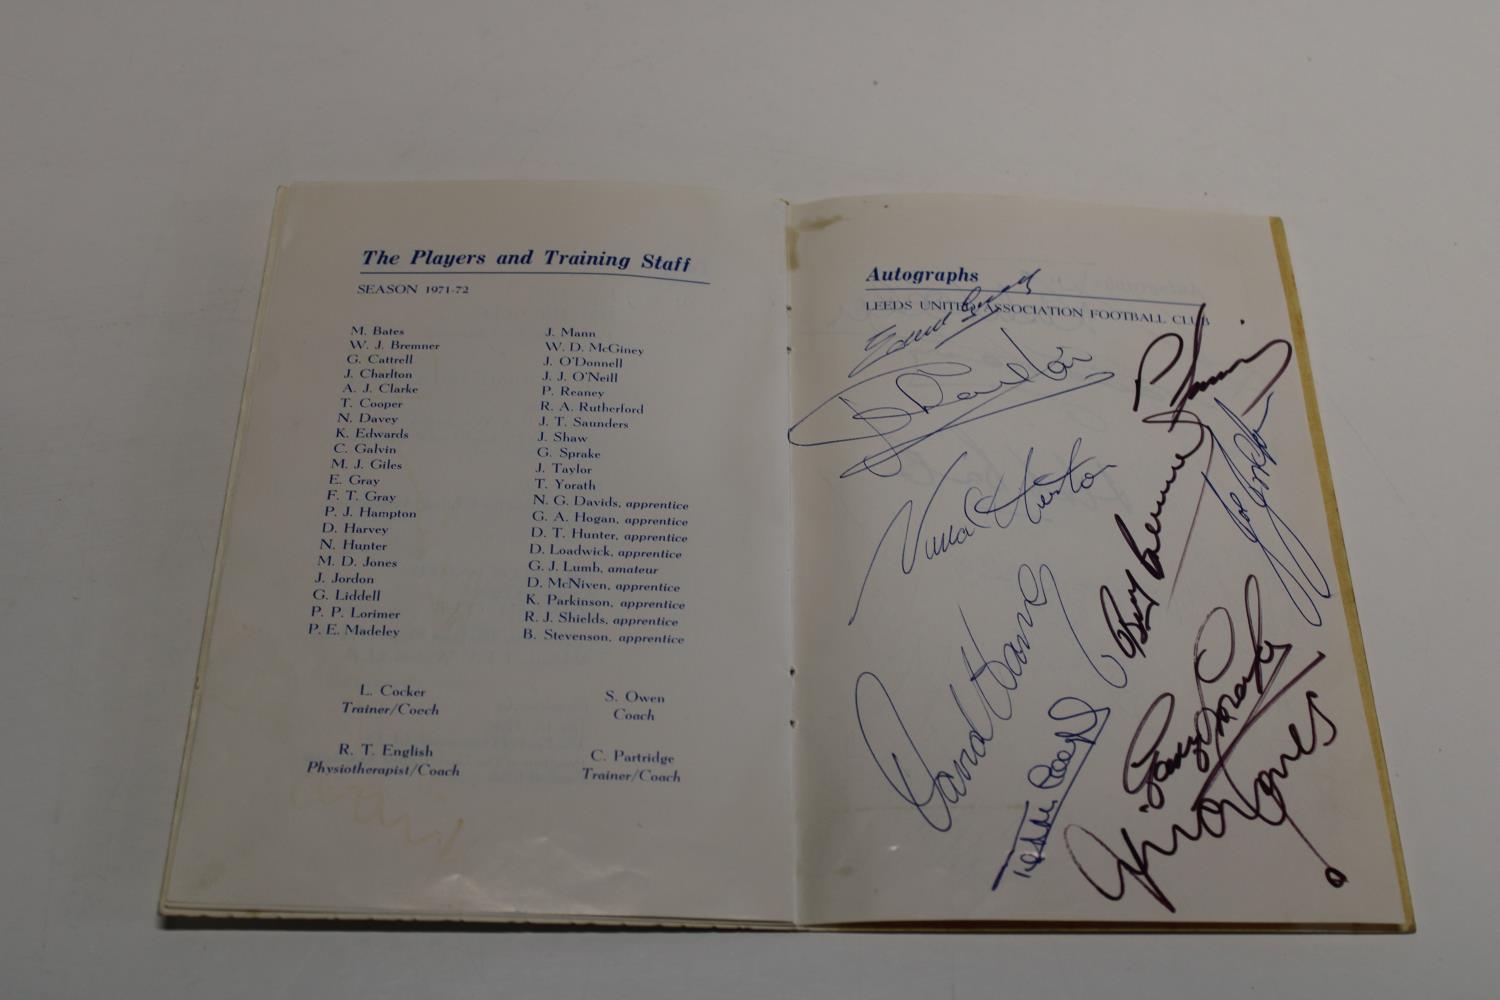 A rare evening dinner menu for the Leeds United squad dated May 6th 1972. For the Cafe Royal - Image 3 of 4